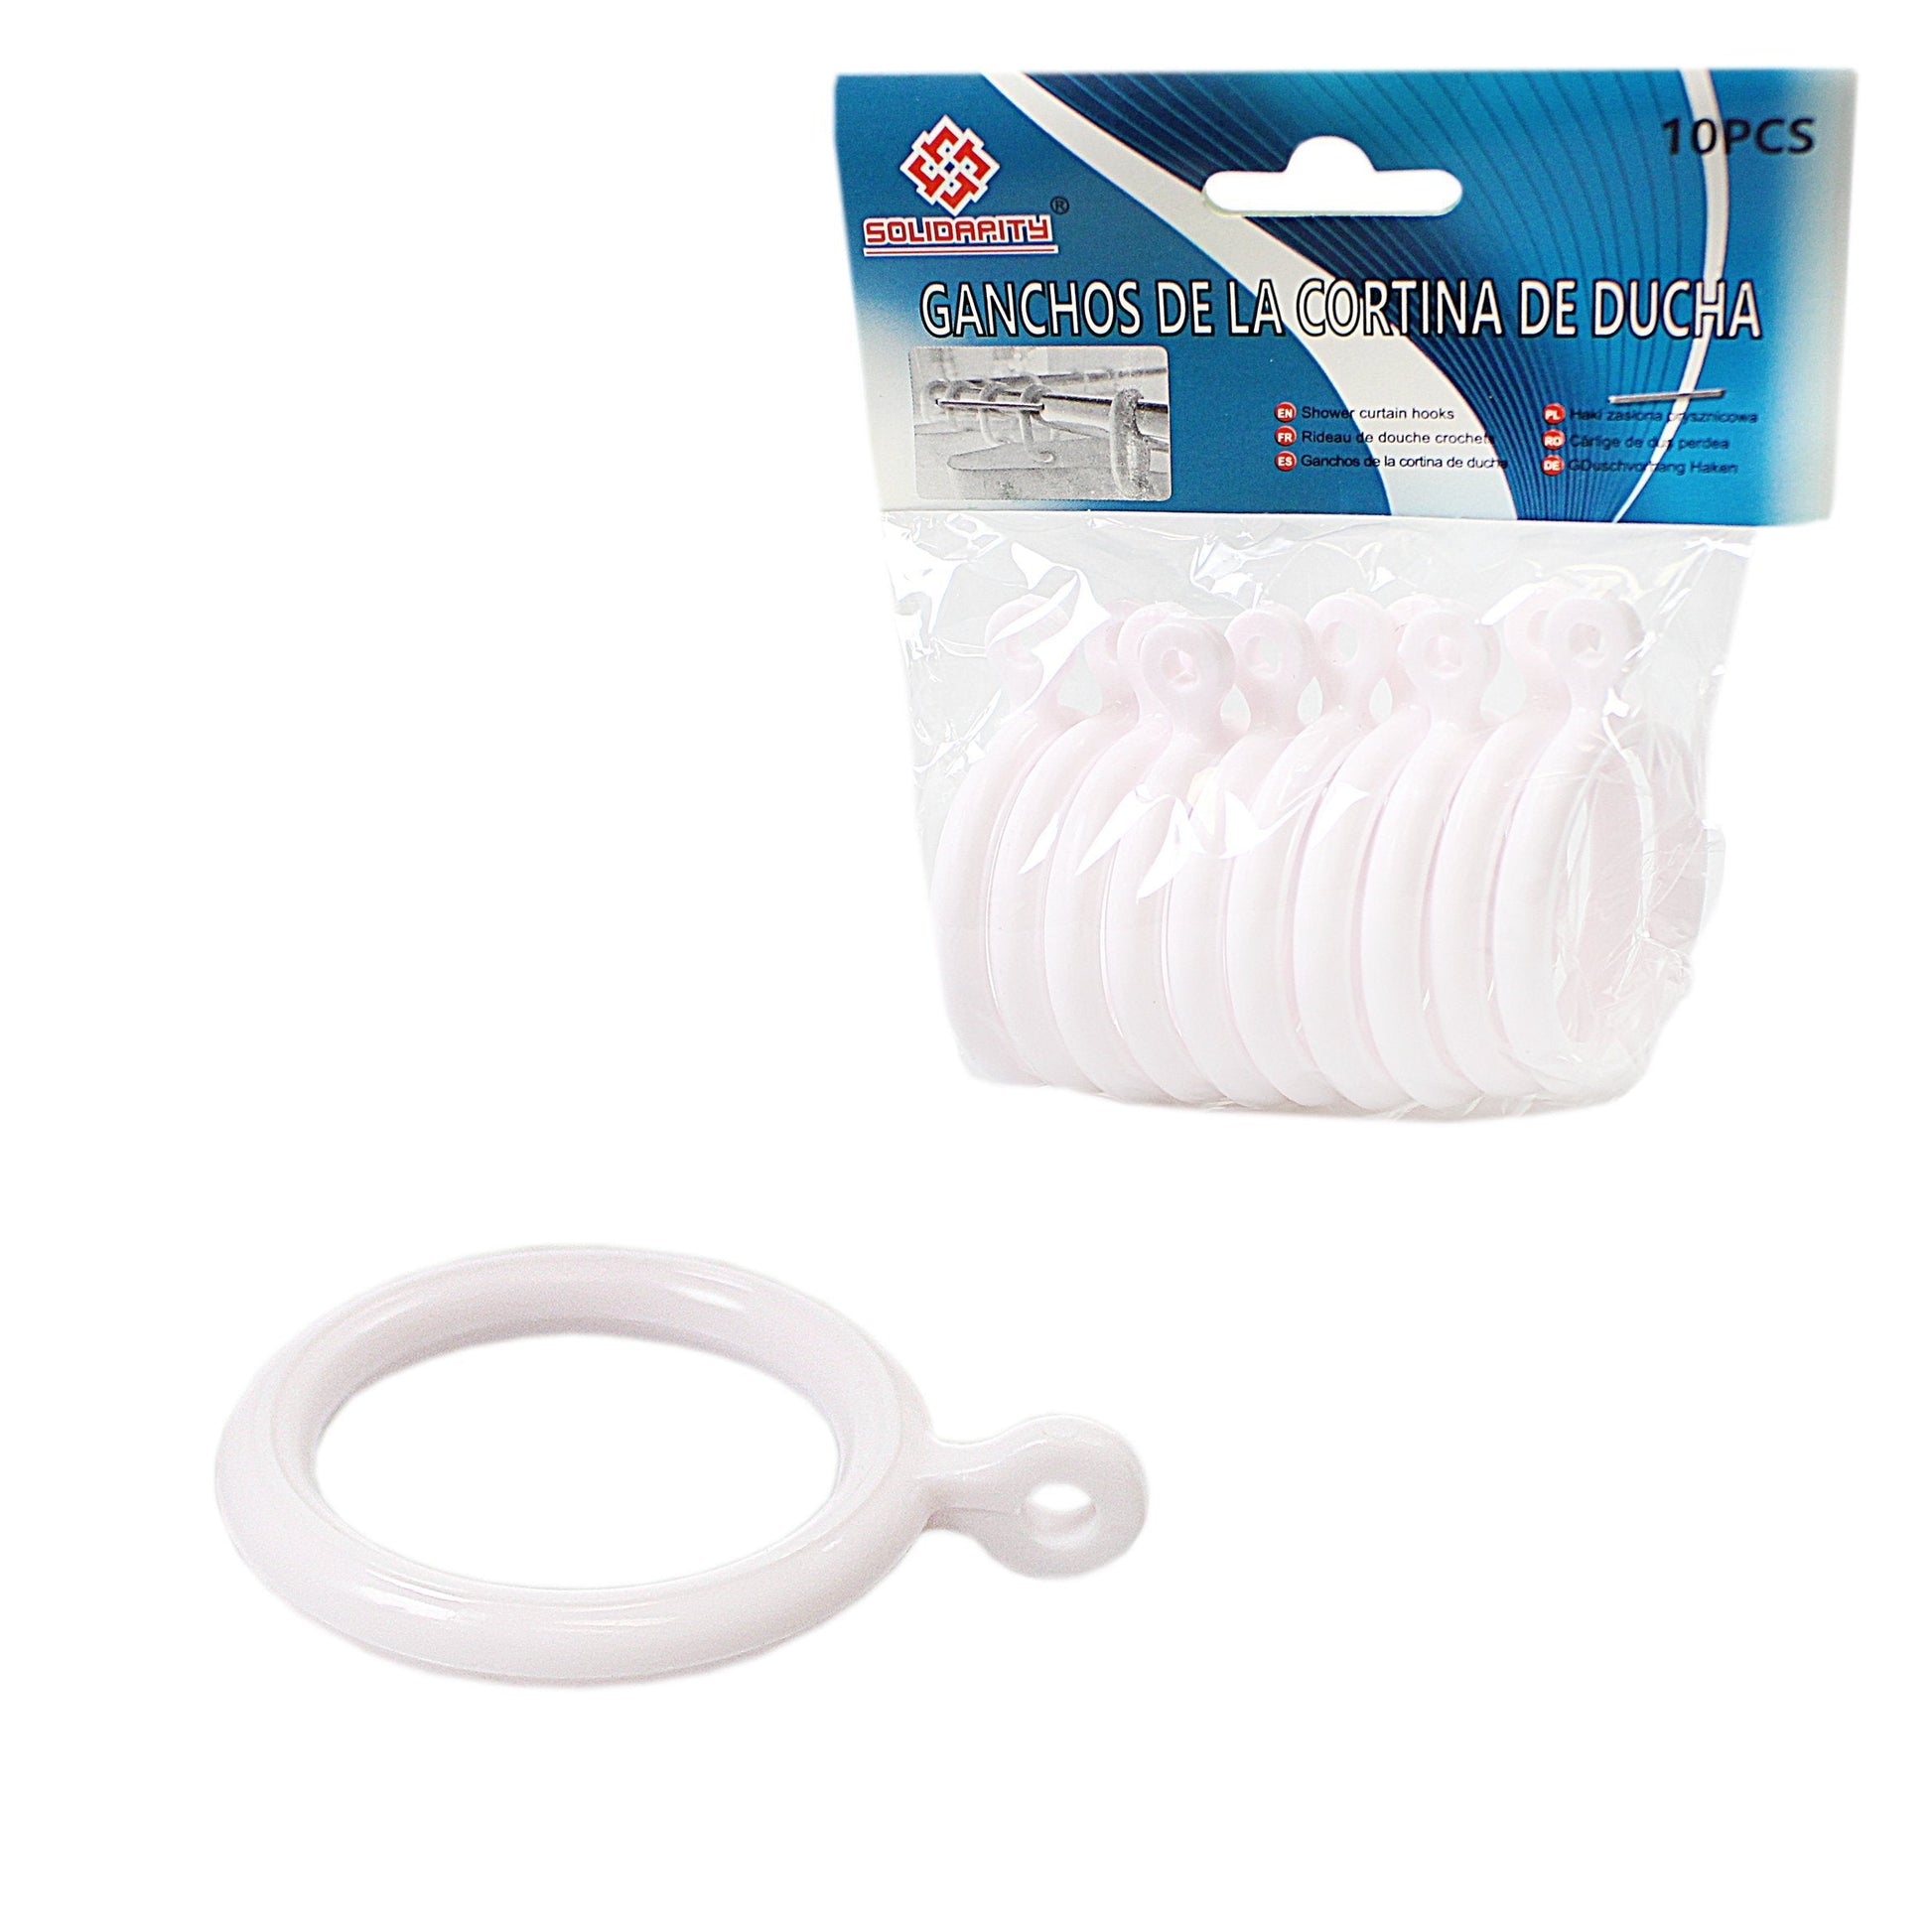 Plastic Shower Curtain Rings White Pack of 10 4778 A (Large Letter